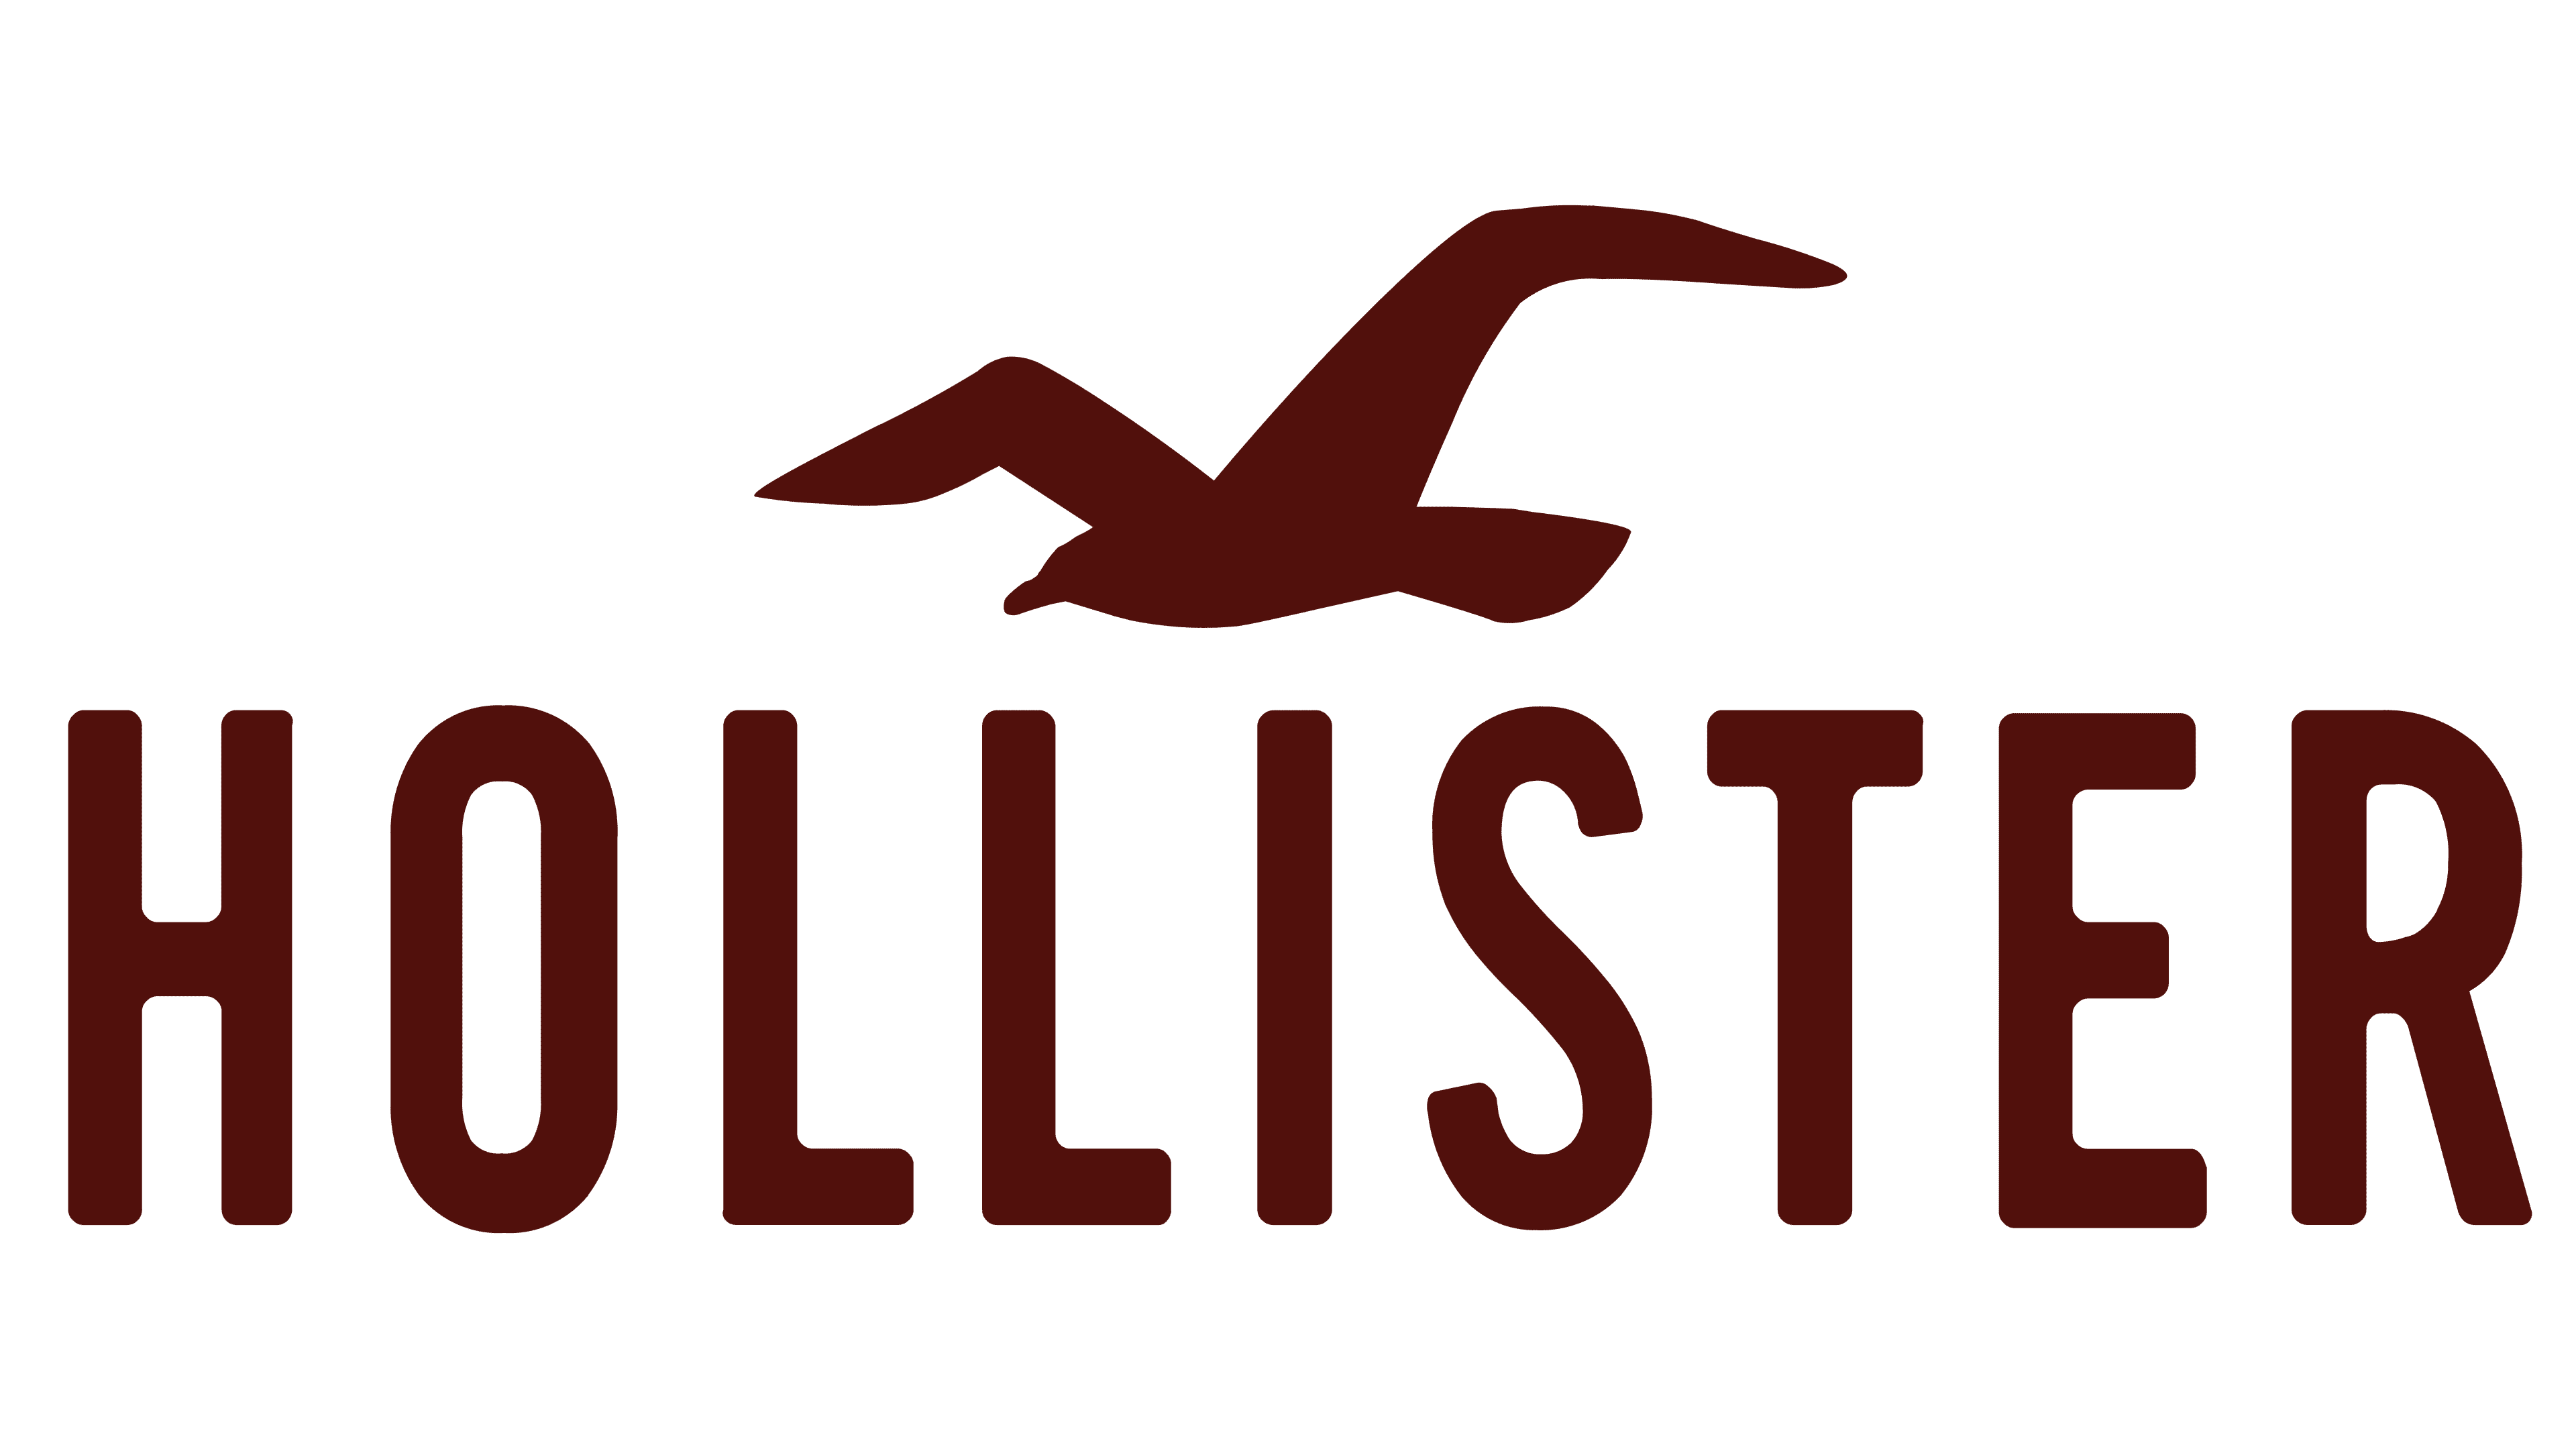 hollister logo meaning